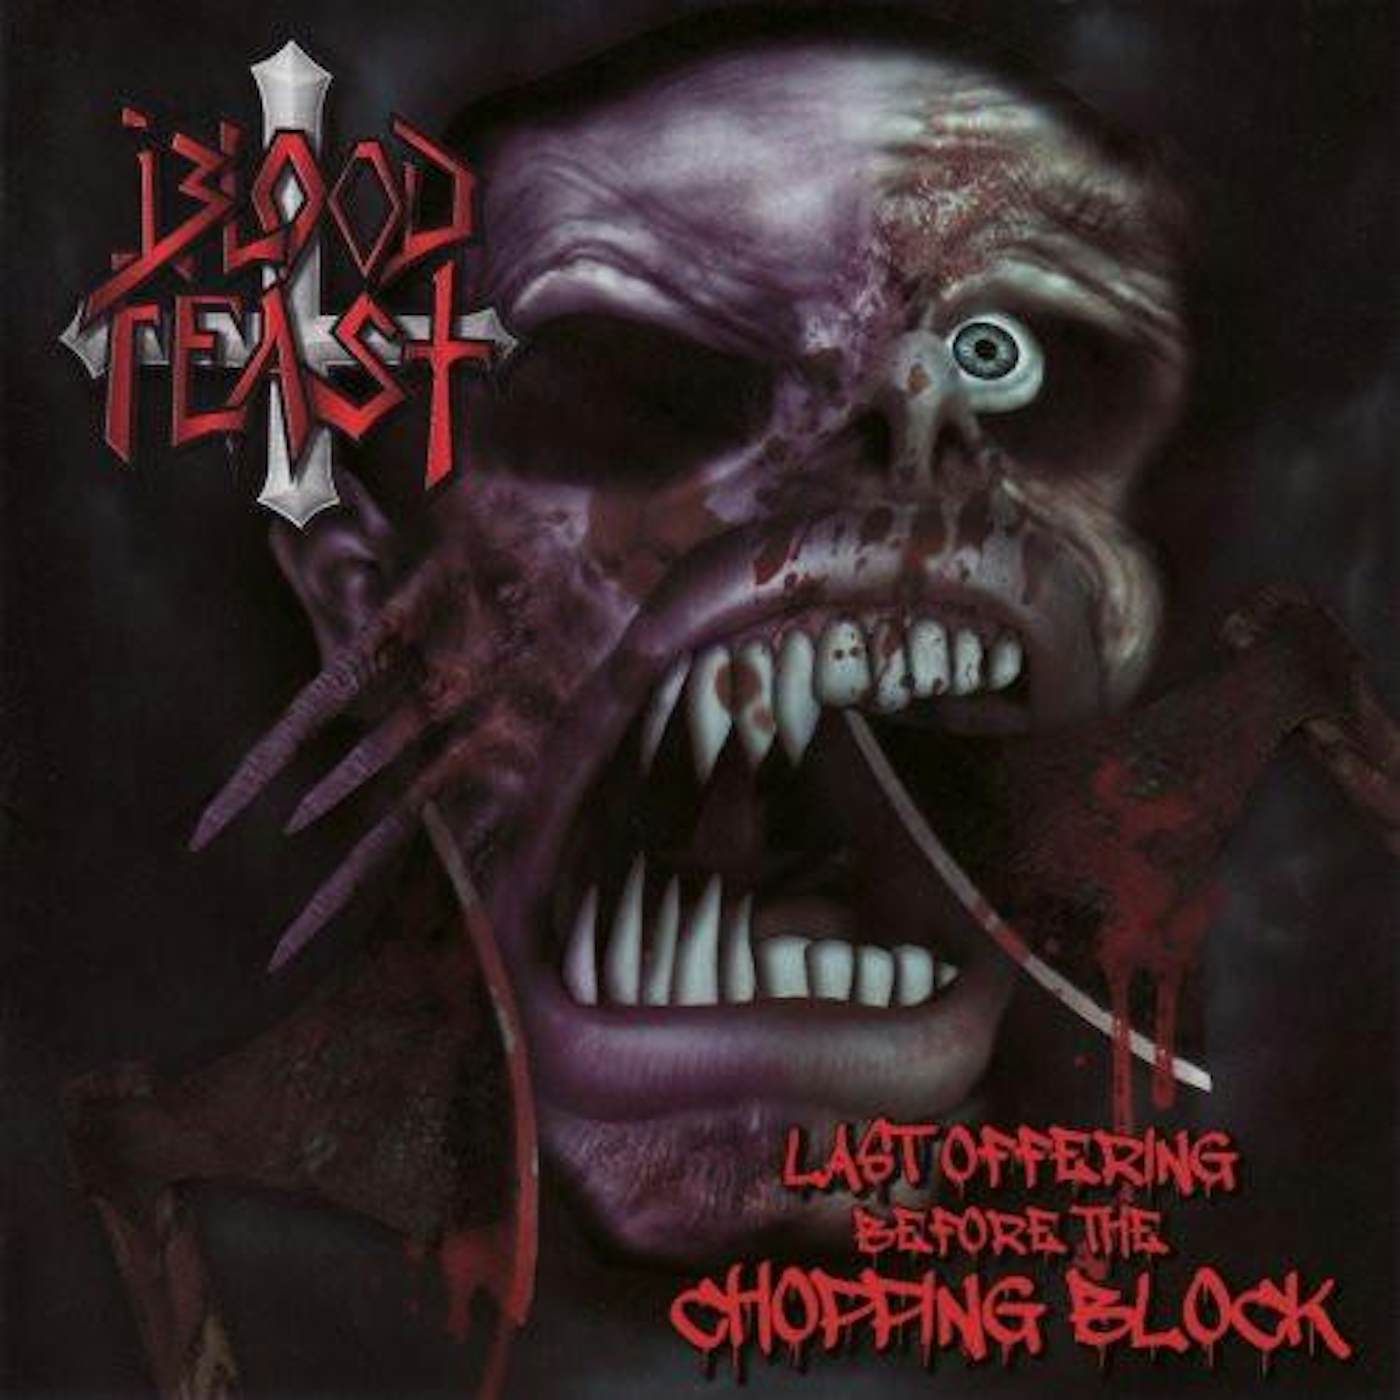 Blood Feast Last Offering Before The Chopping Block Vinyl Record